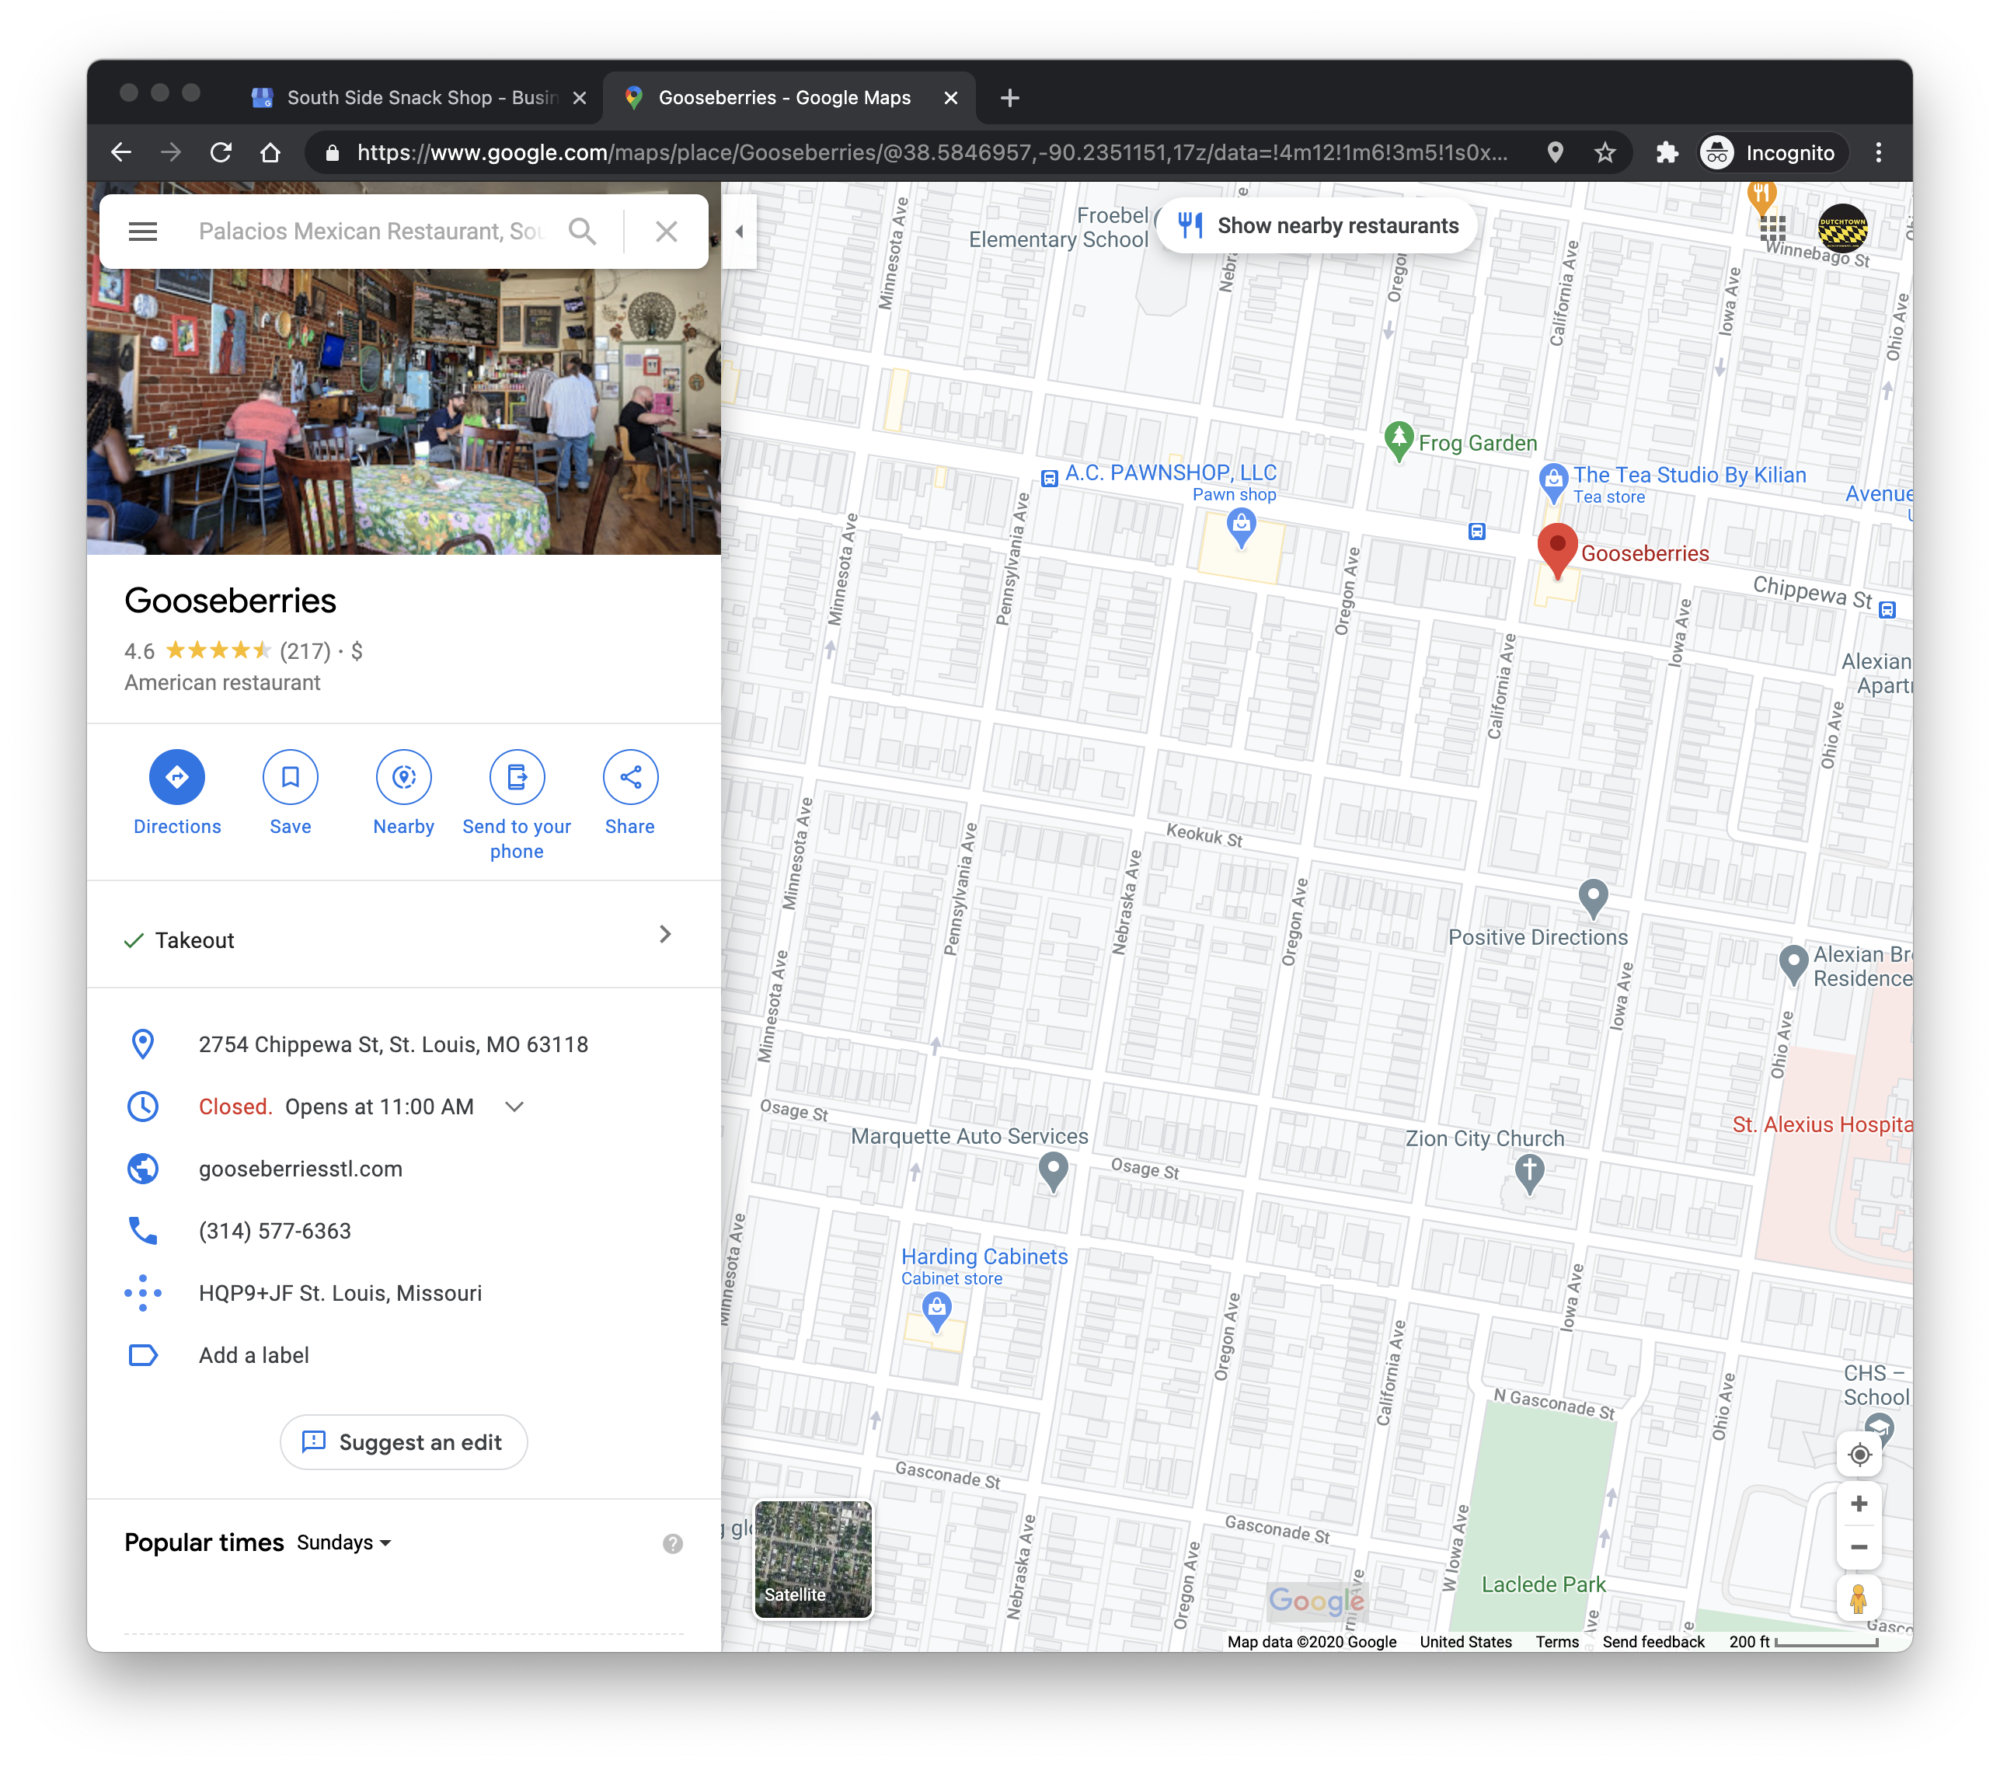 Google Maps results displaying information for Gooseberries in Dutchtown, St. Louis, MO.